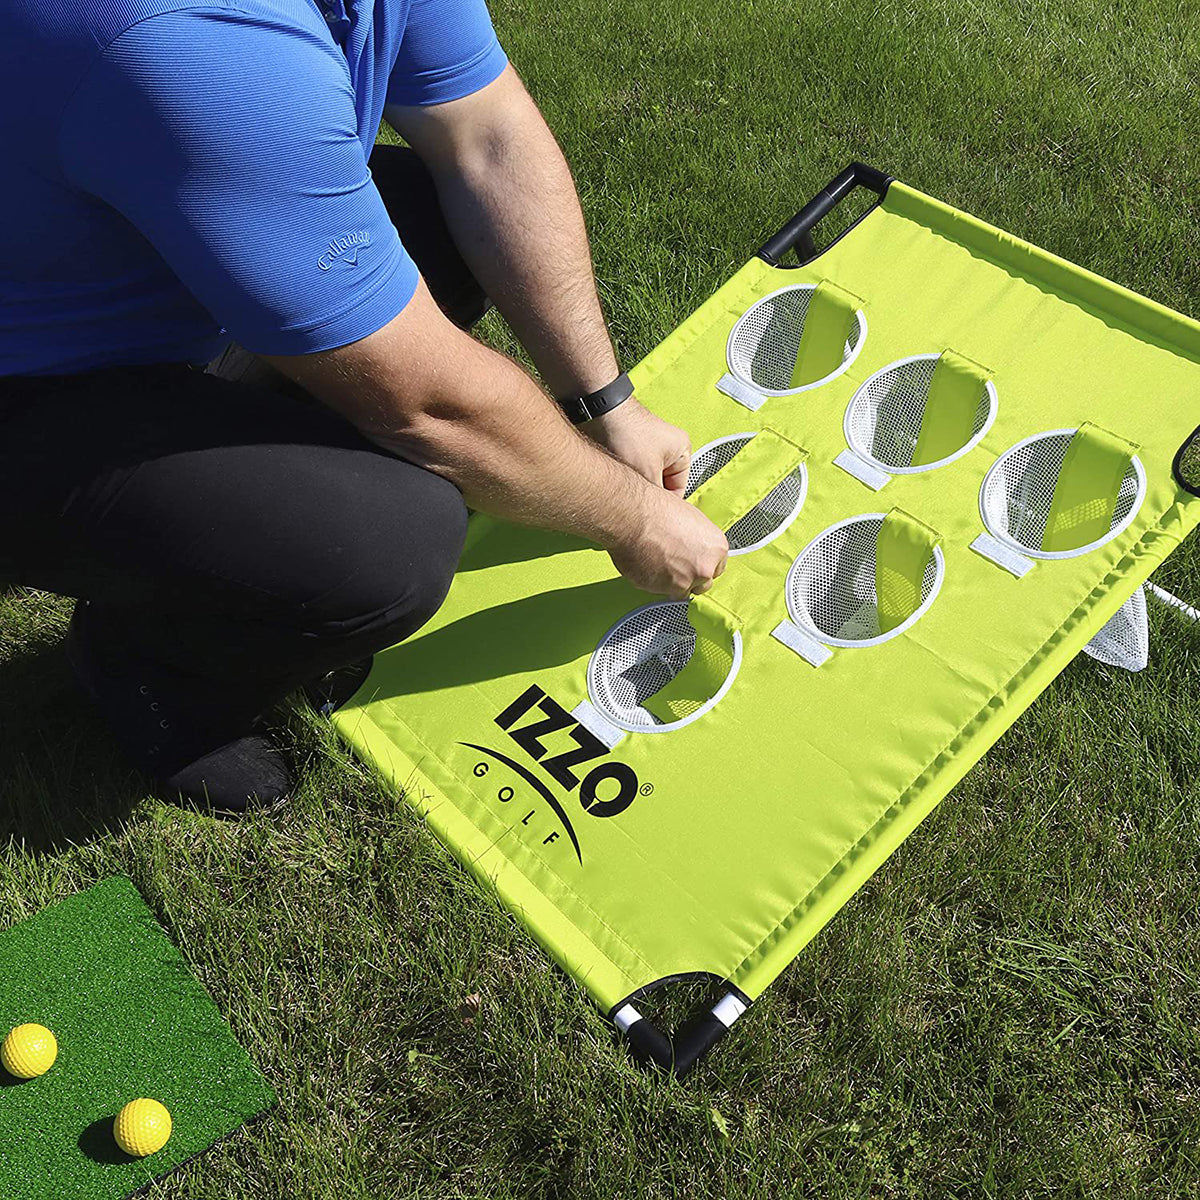 Izzo Golf Pong-Hole Chipping Practice and Gaming Set Izzo